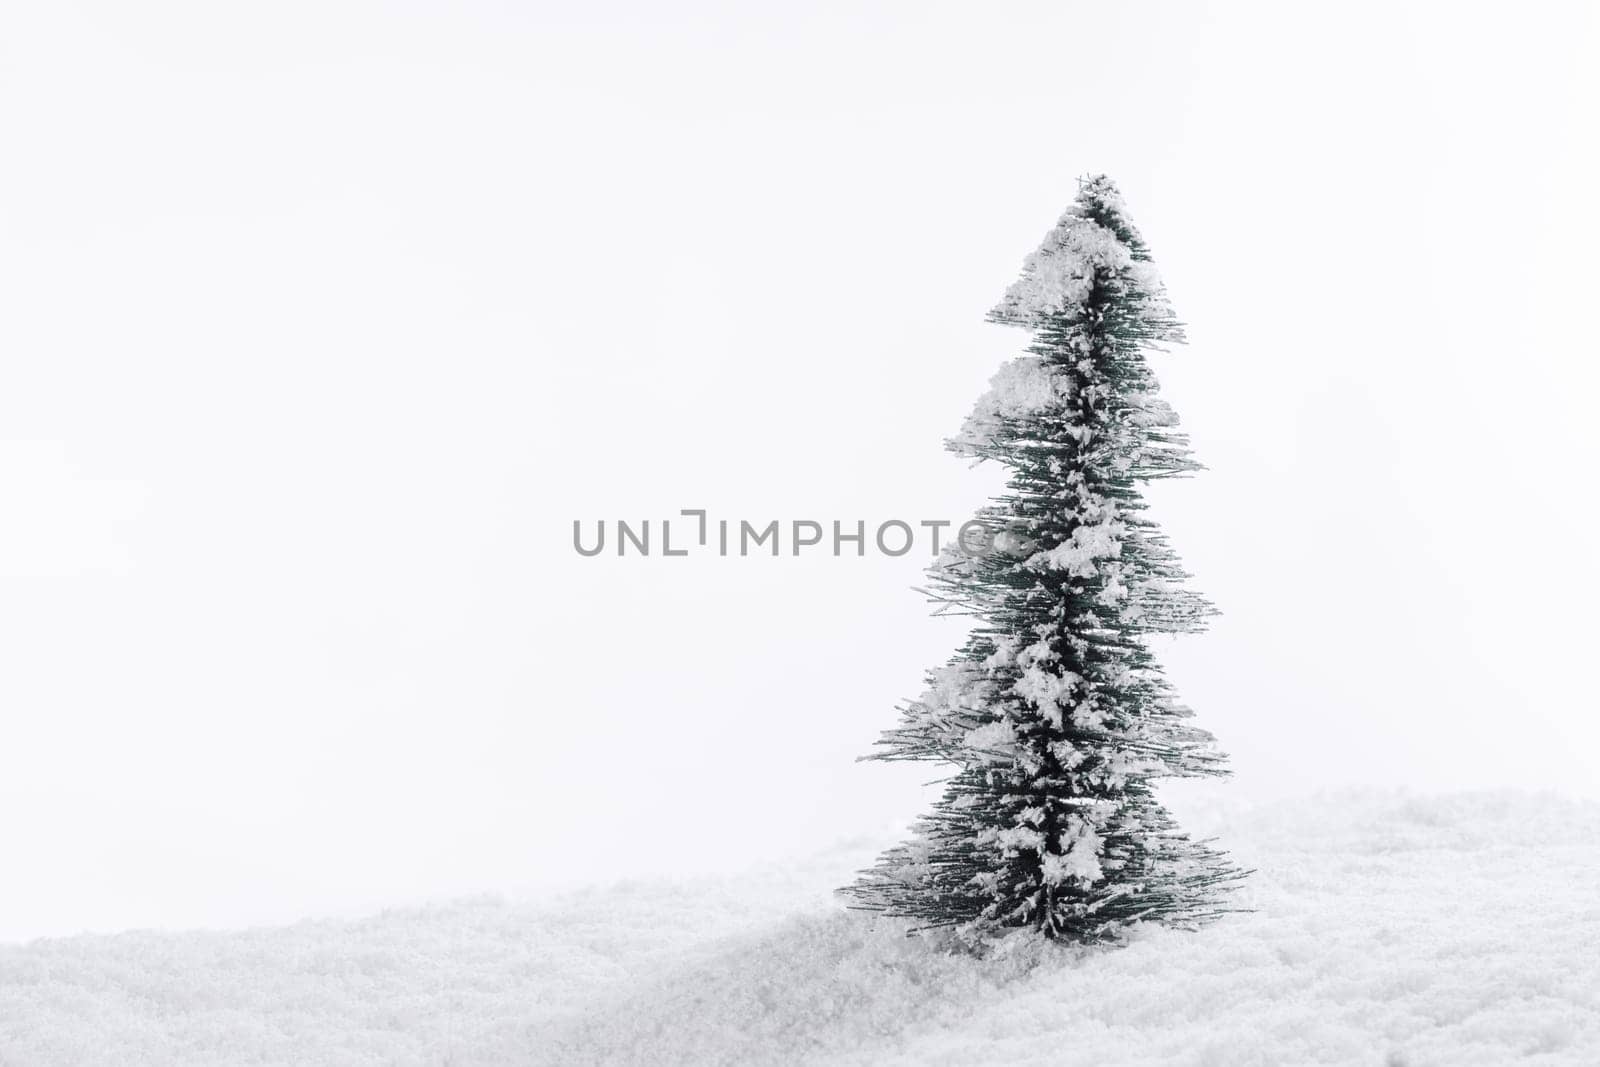 Decorative Christmas tree in snow by Yellowj